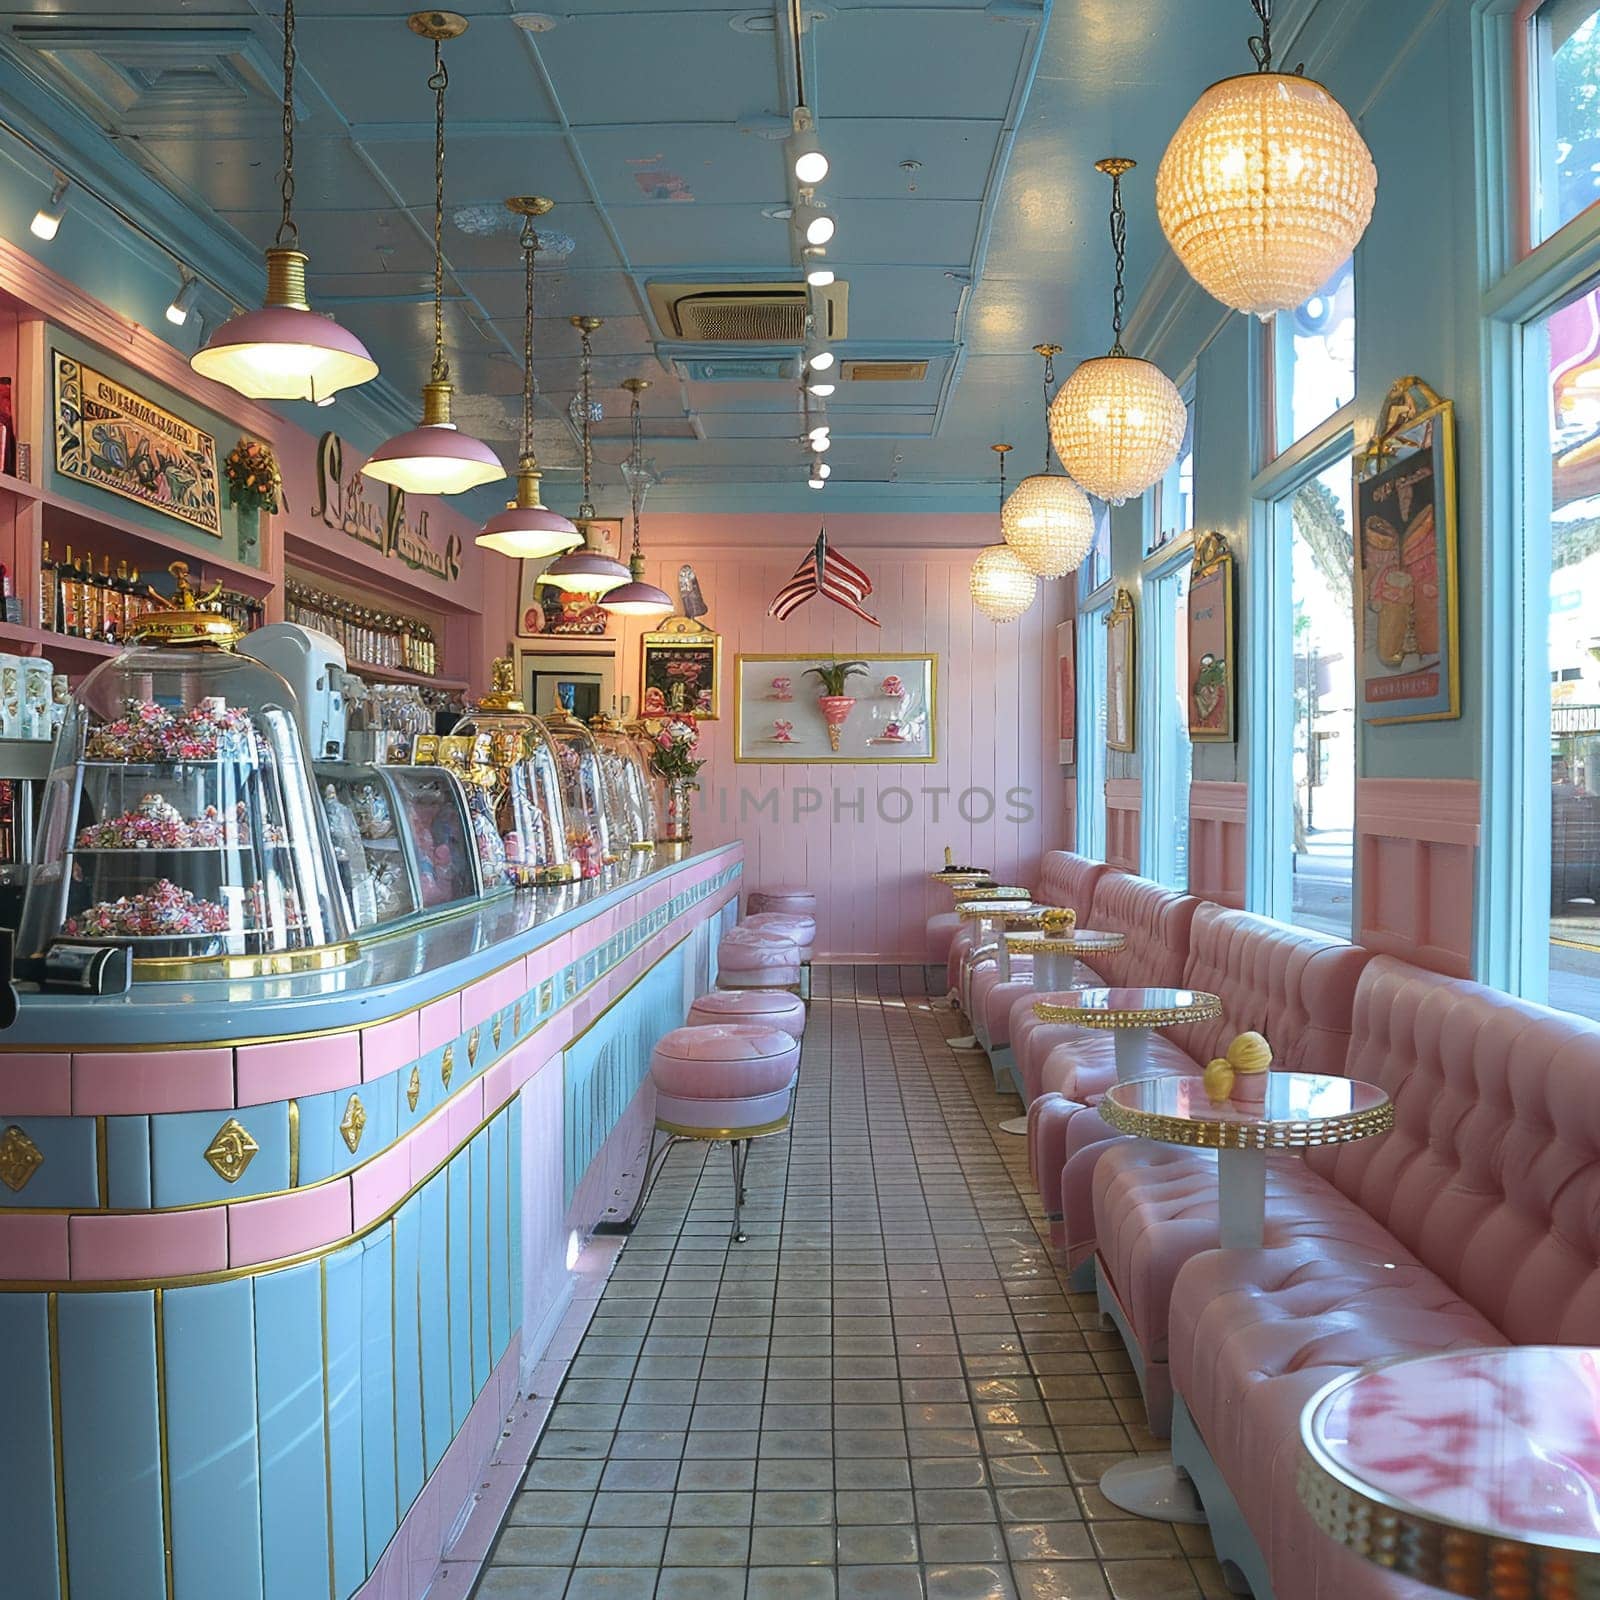 Whimsical ice cream parlor with pastel colors and vintage decor. by Benzoix